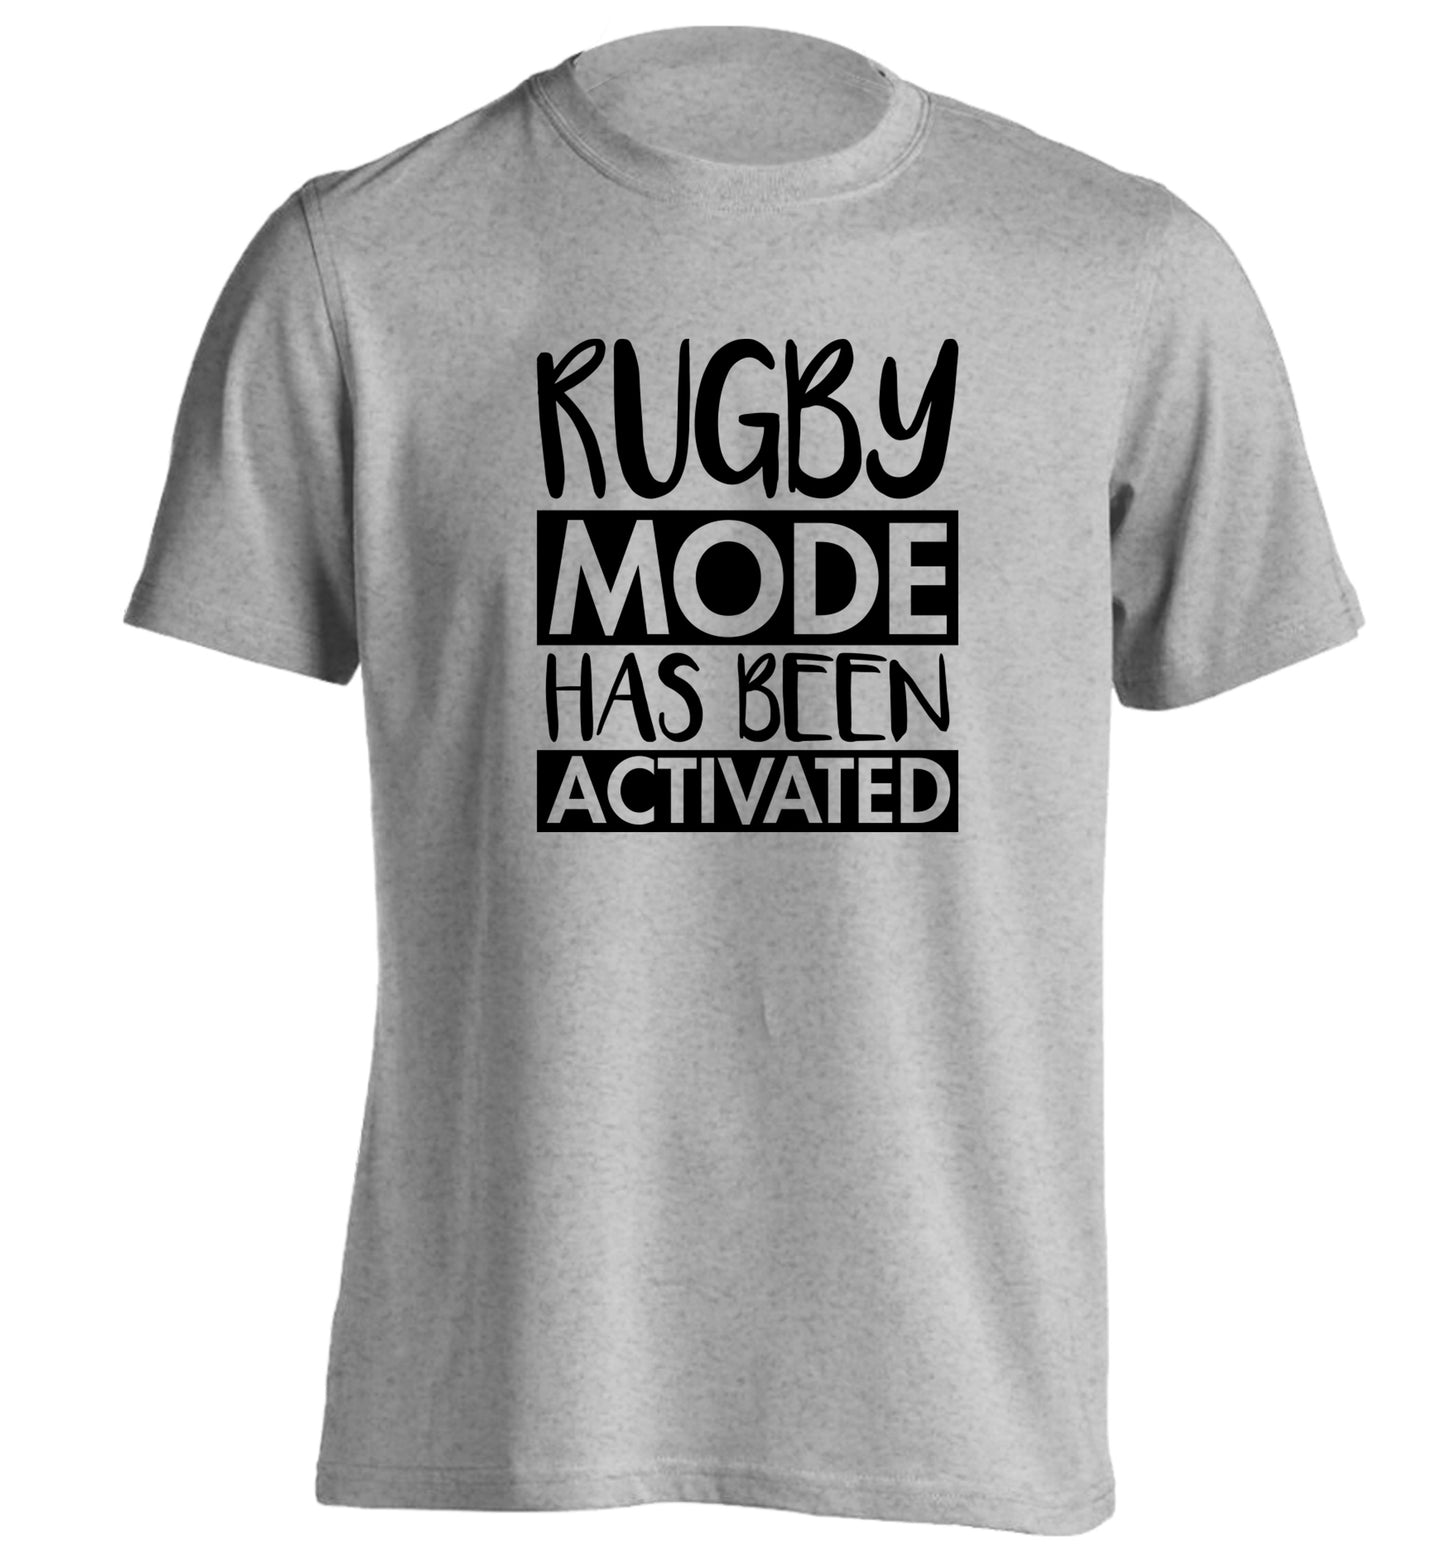 Rugby mode activated adults unisex grey Tshirt 2XL